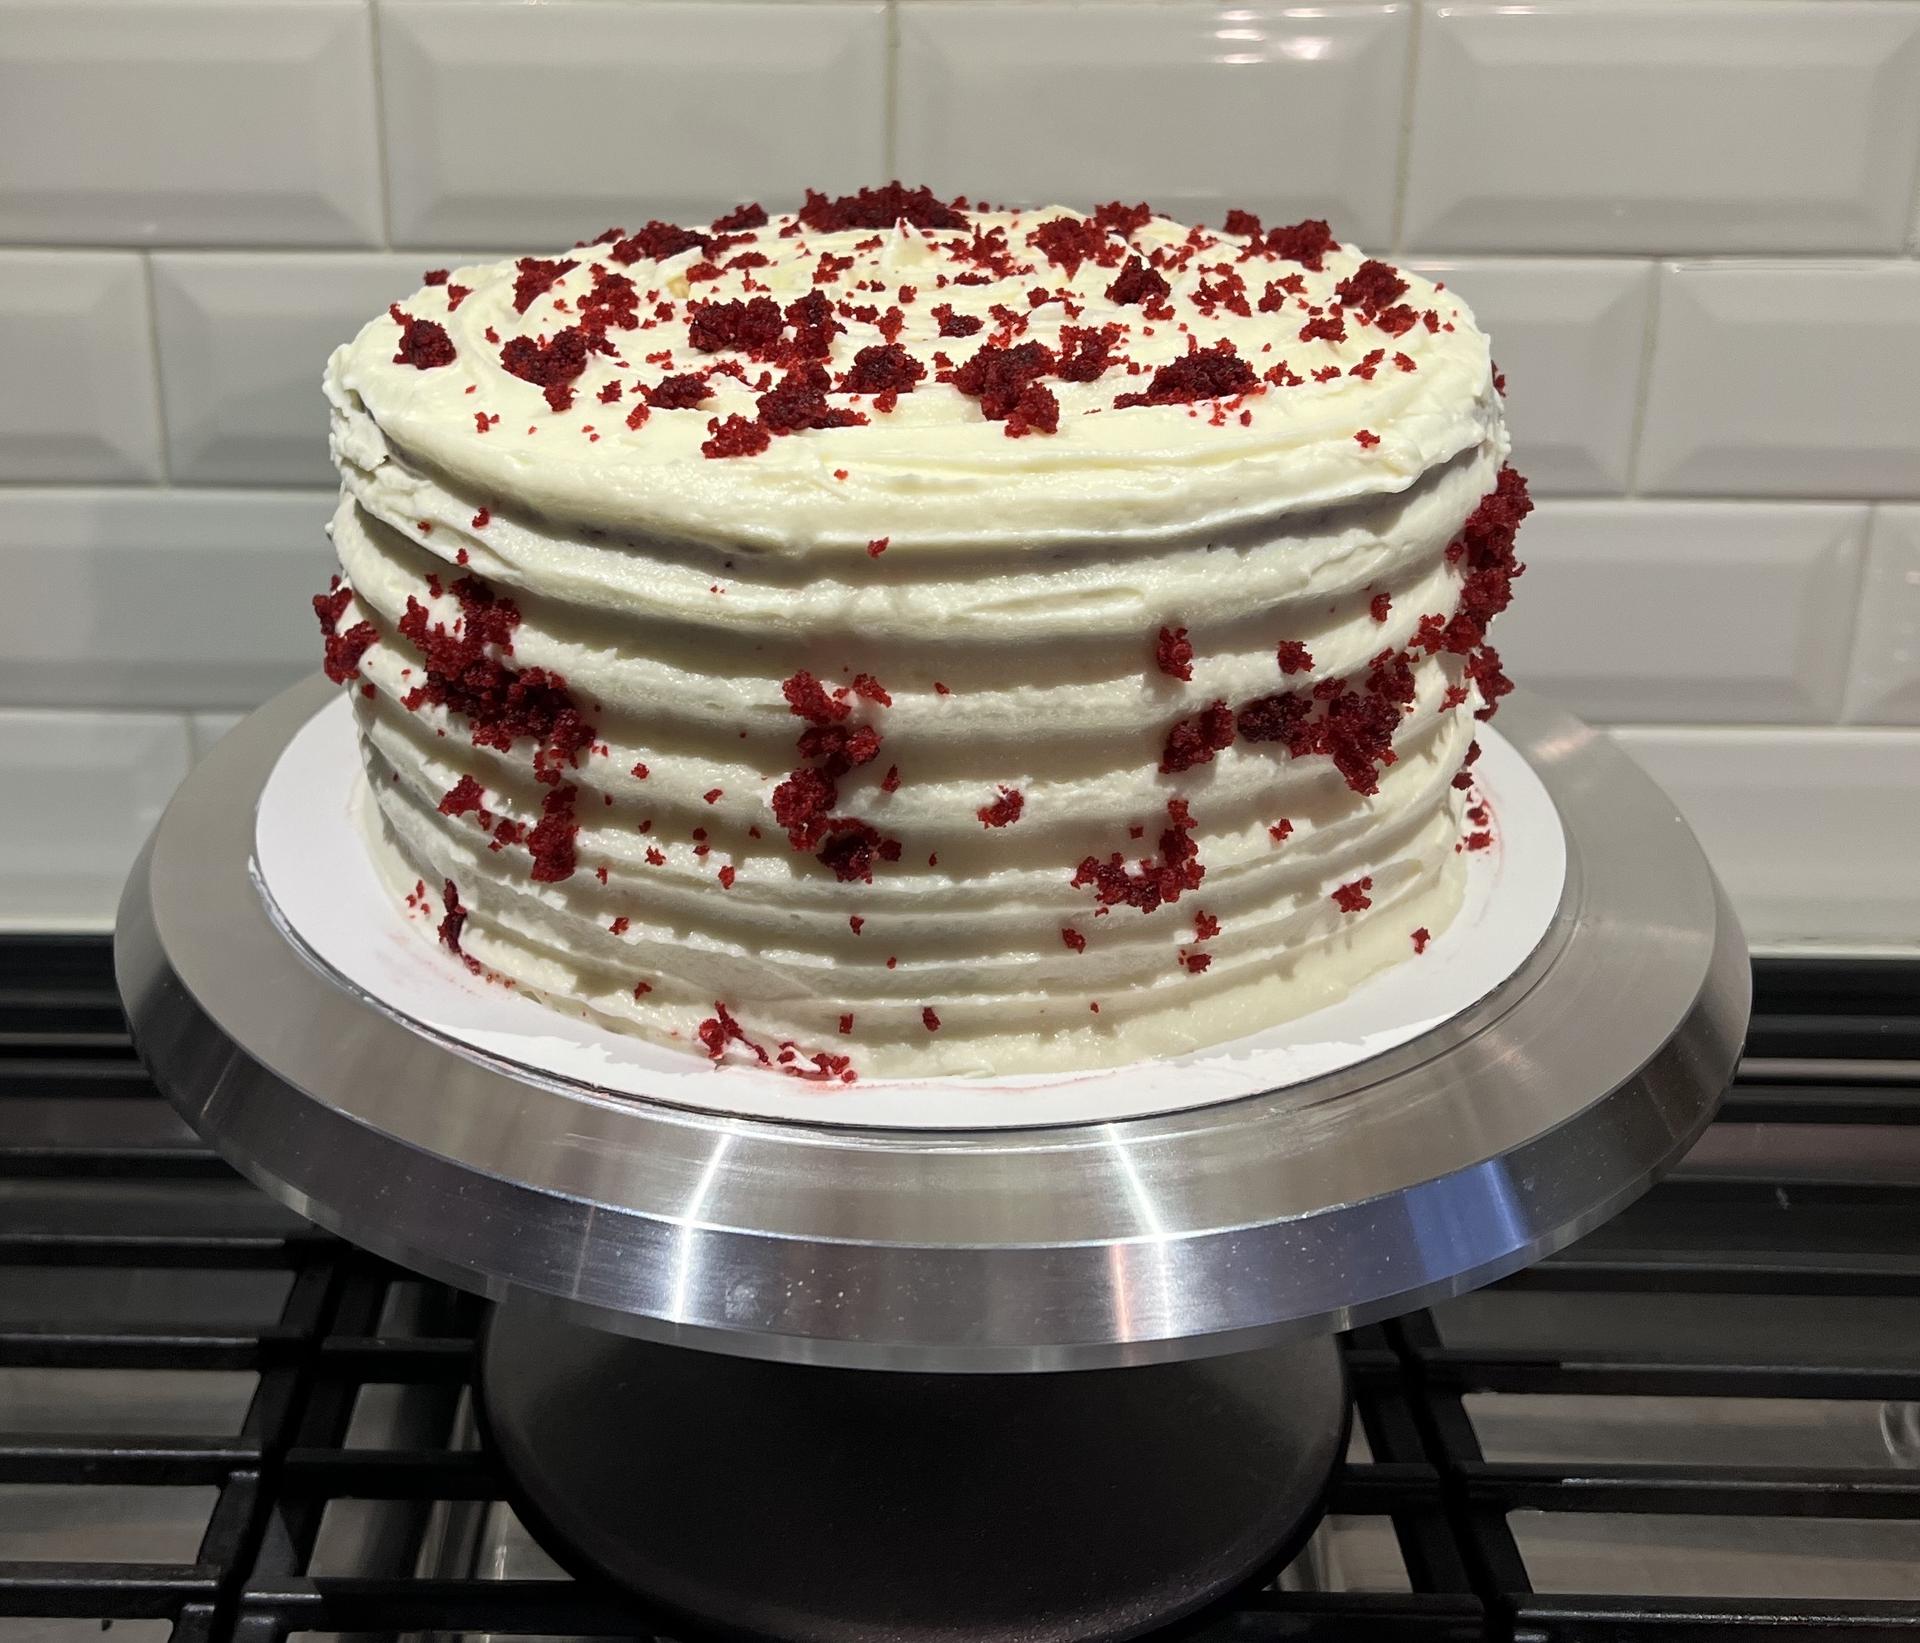 Our Newest Cake - Red Velvet Cream Cheese Cake